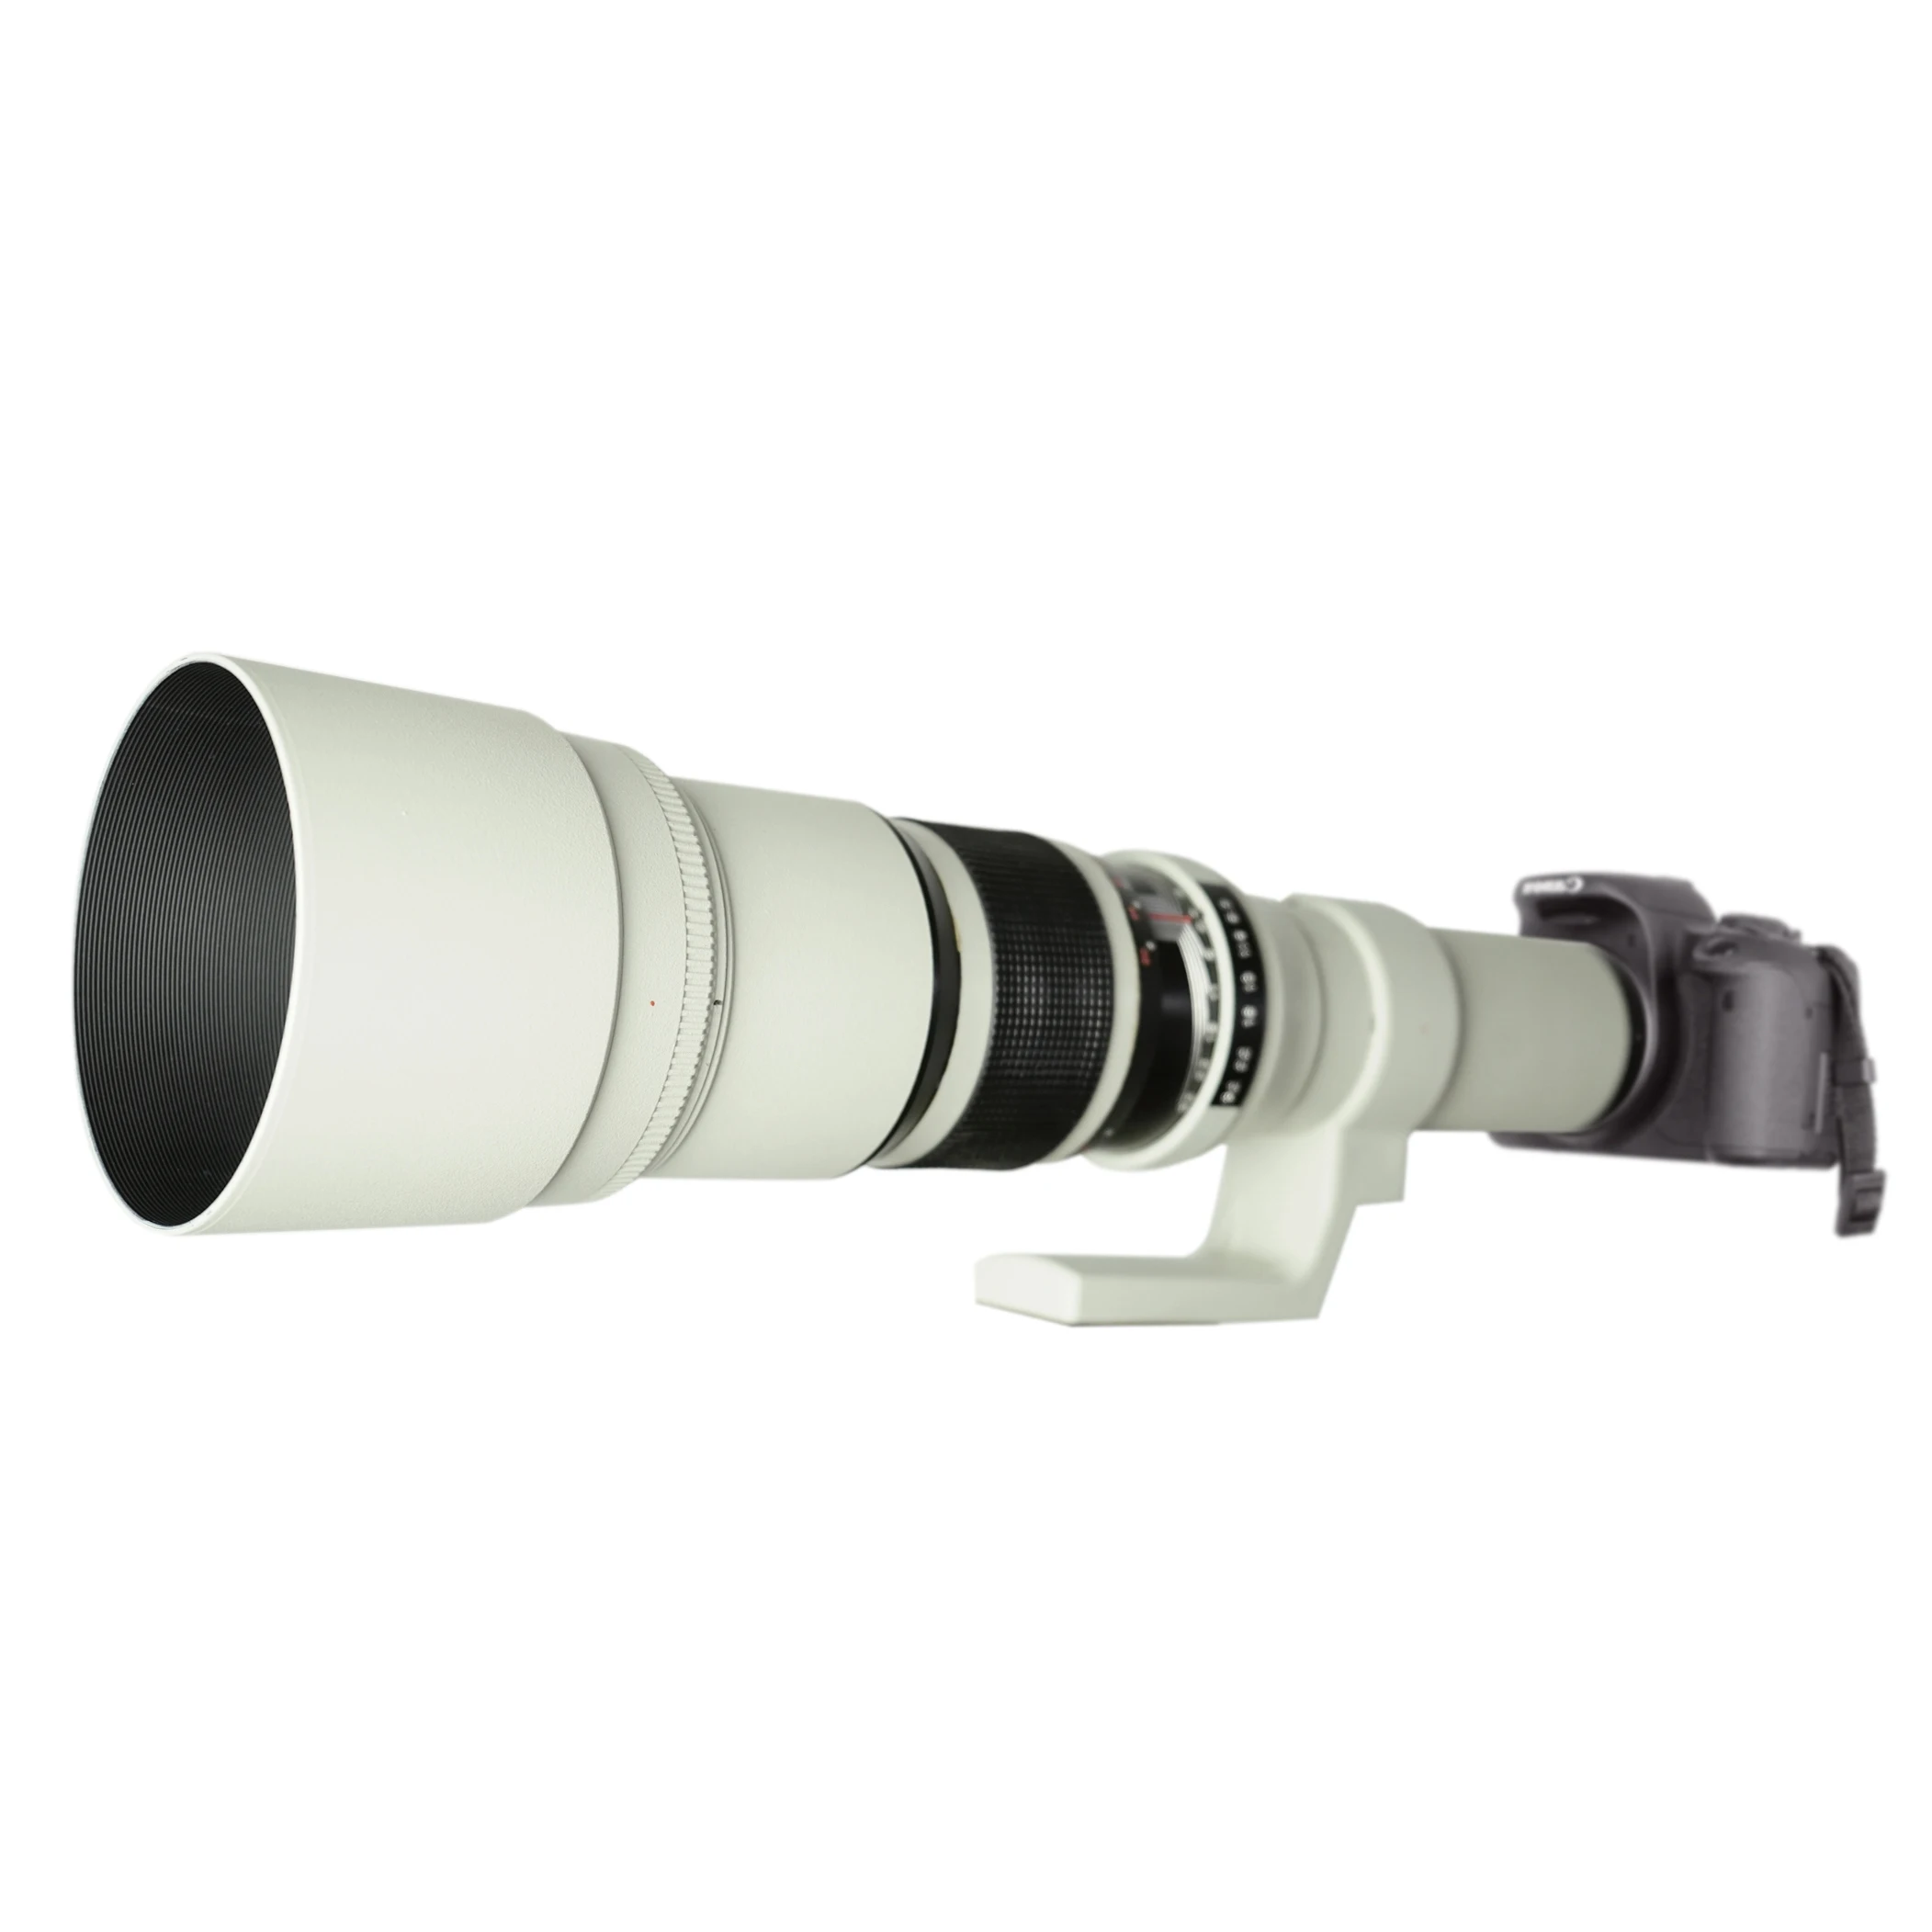 

500mm f/6.3 Telephoto Fixed Telephoto Lens for Canon Nikon DSLR Camera with T mount